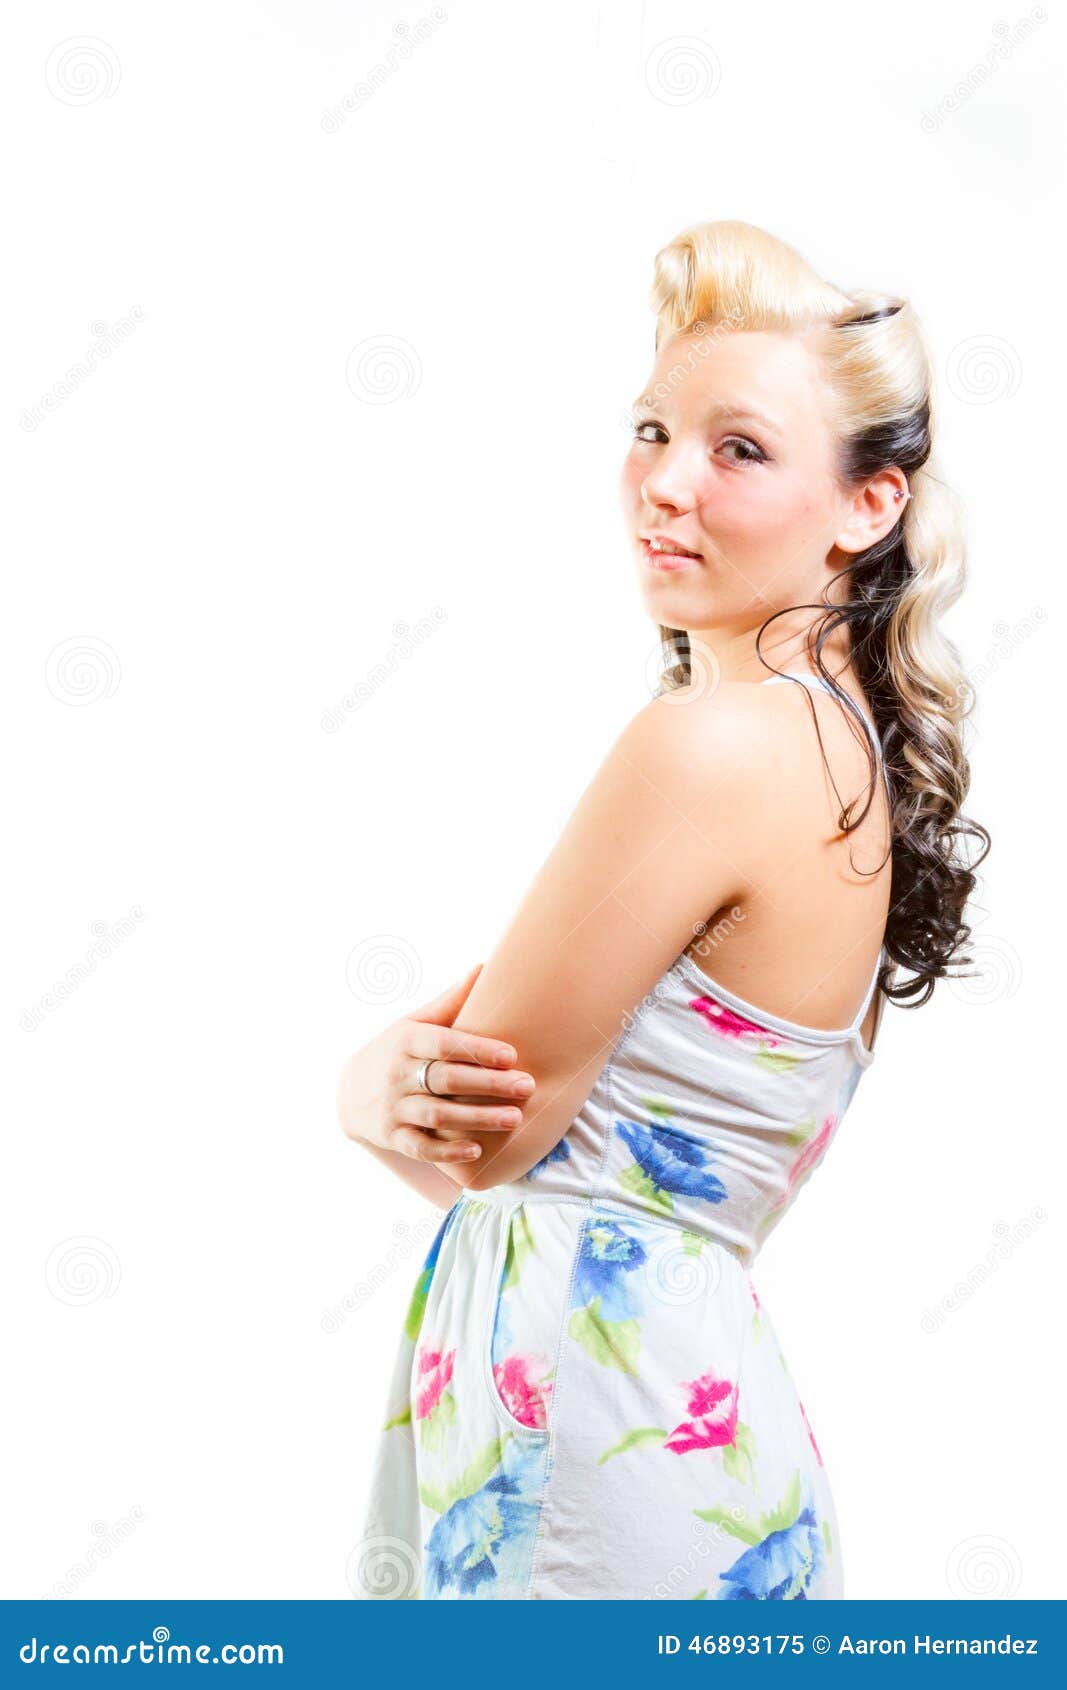 Young Woman in Short Modest Dress Stock Image - Image of body, girl ...